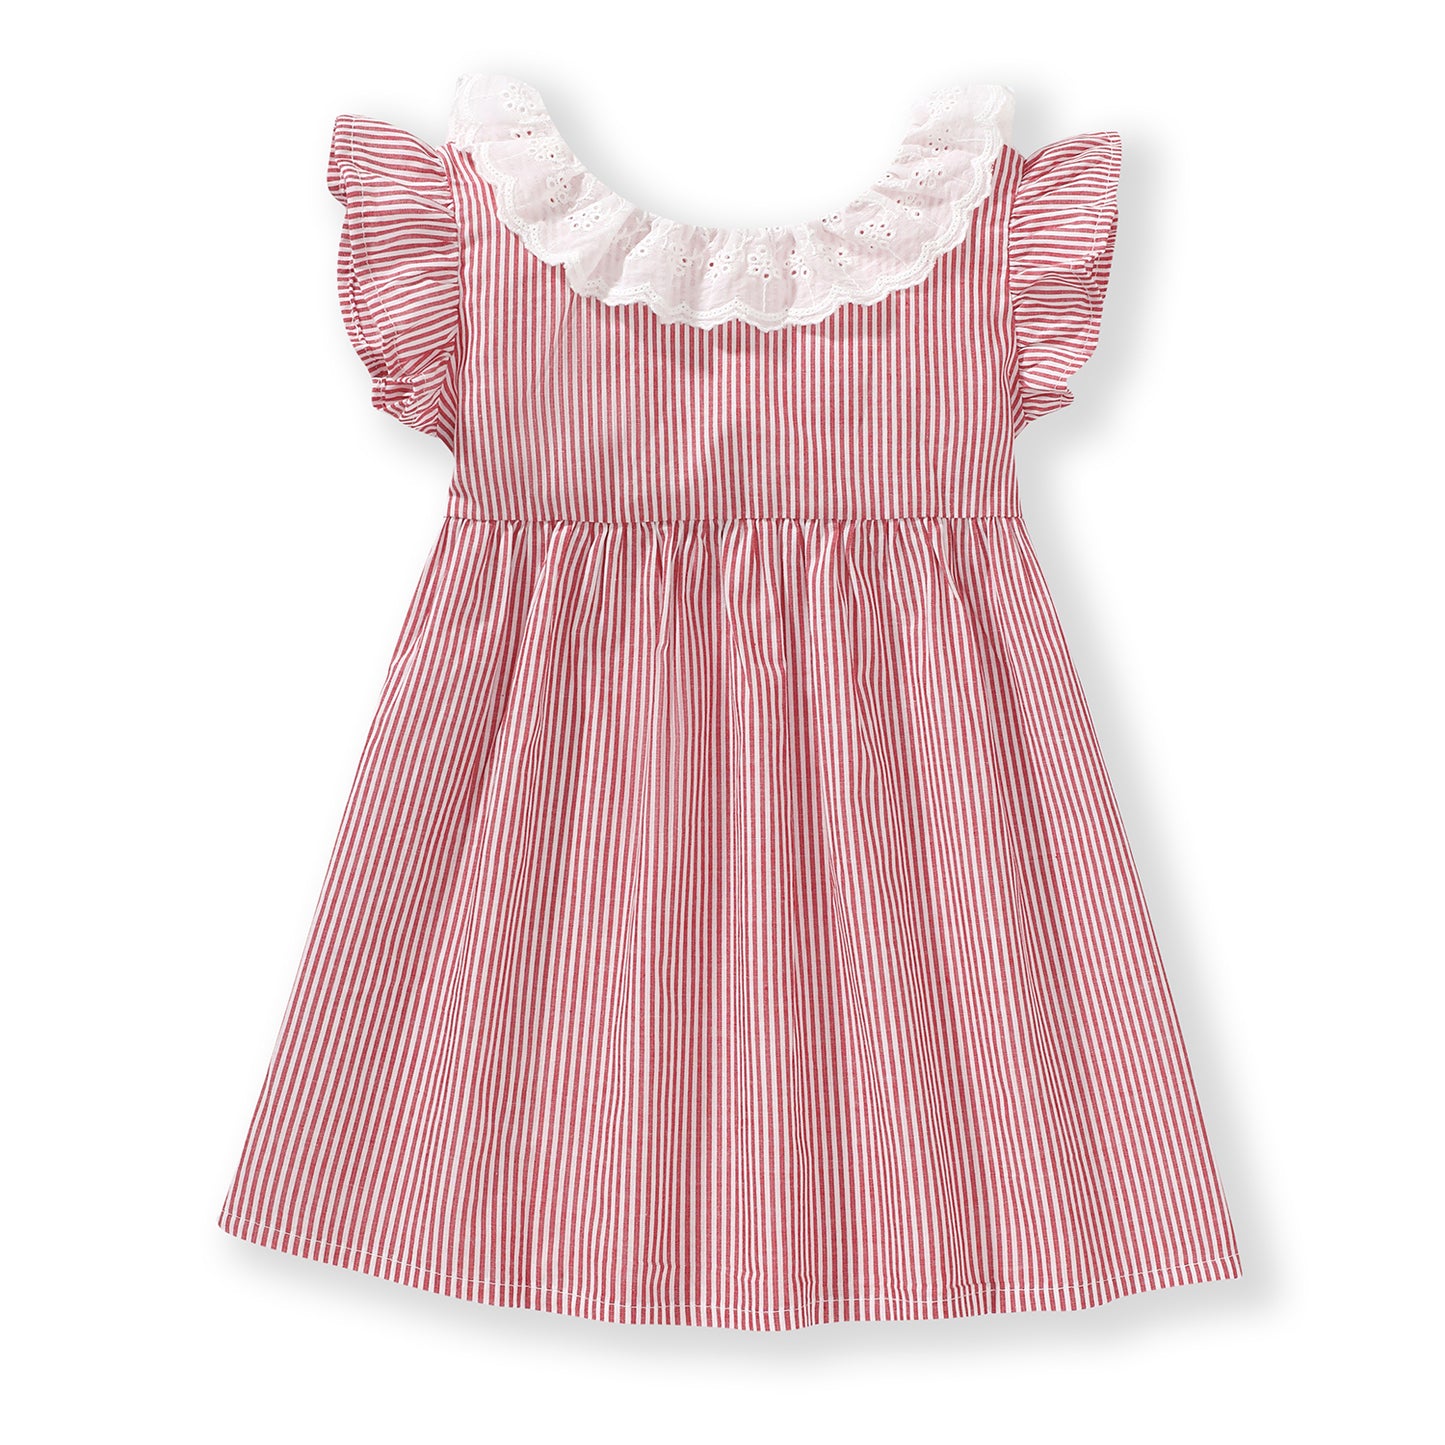 Dear Pastel Toddler Girl's Striped Dress |  Mia Collection